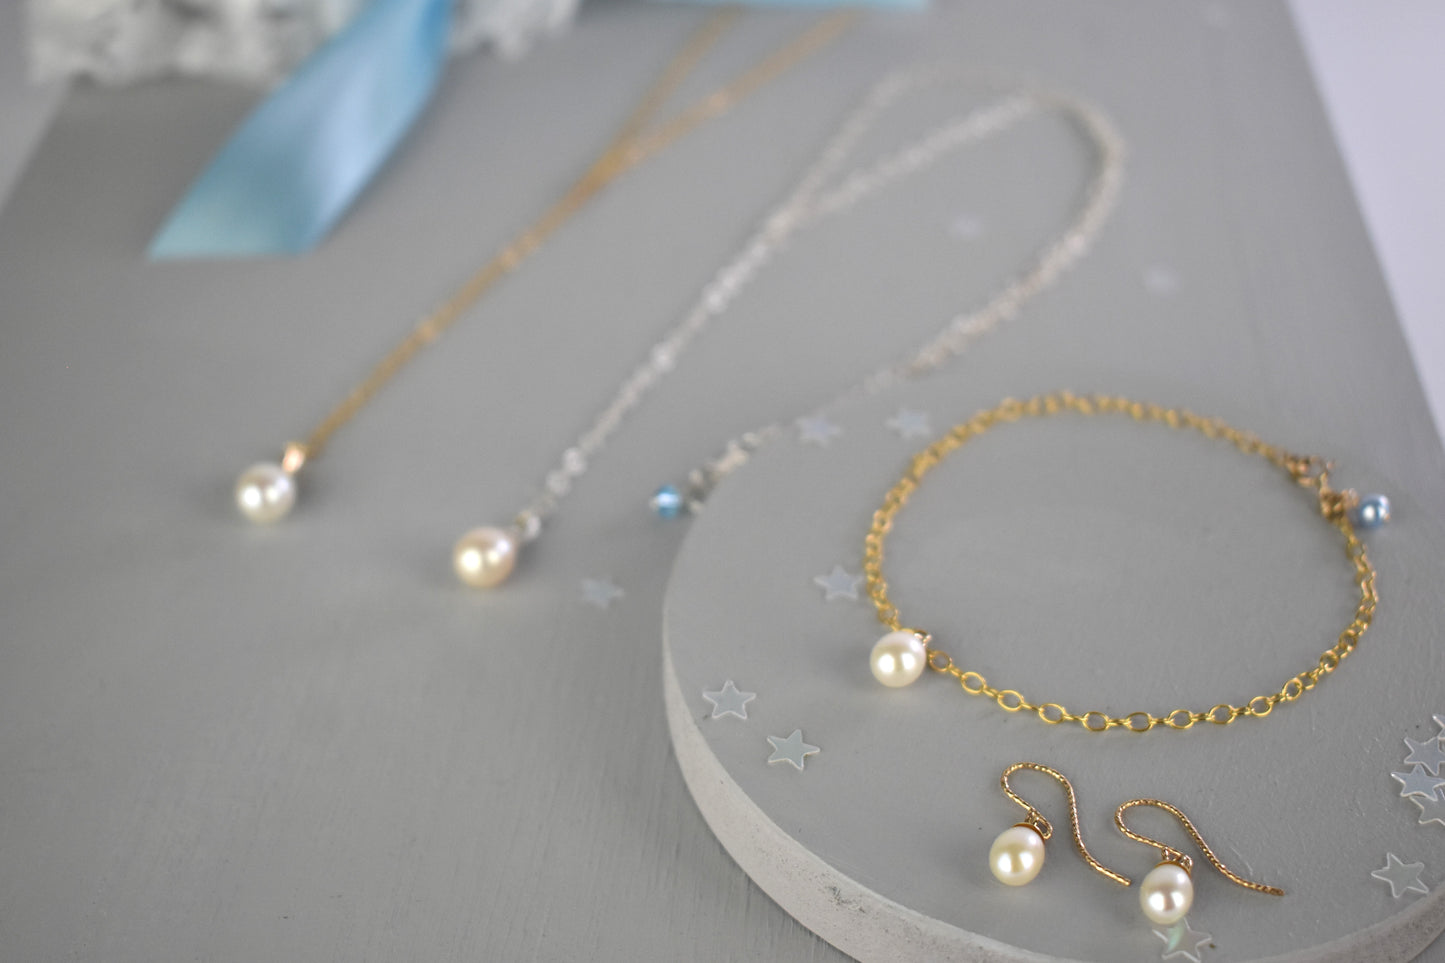 Something blue gift set shown in gold filled finish with sterling silver version in background. Freshwater pearls. on a lariat necklace, chain bracelet both finished with a tiny blue crystal or pearl. Matching freshwater pearl earrings on gold plated wires.